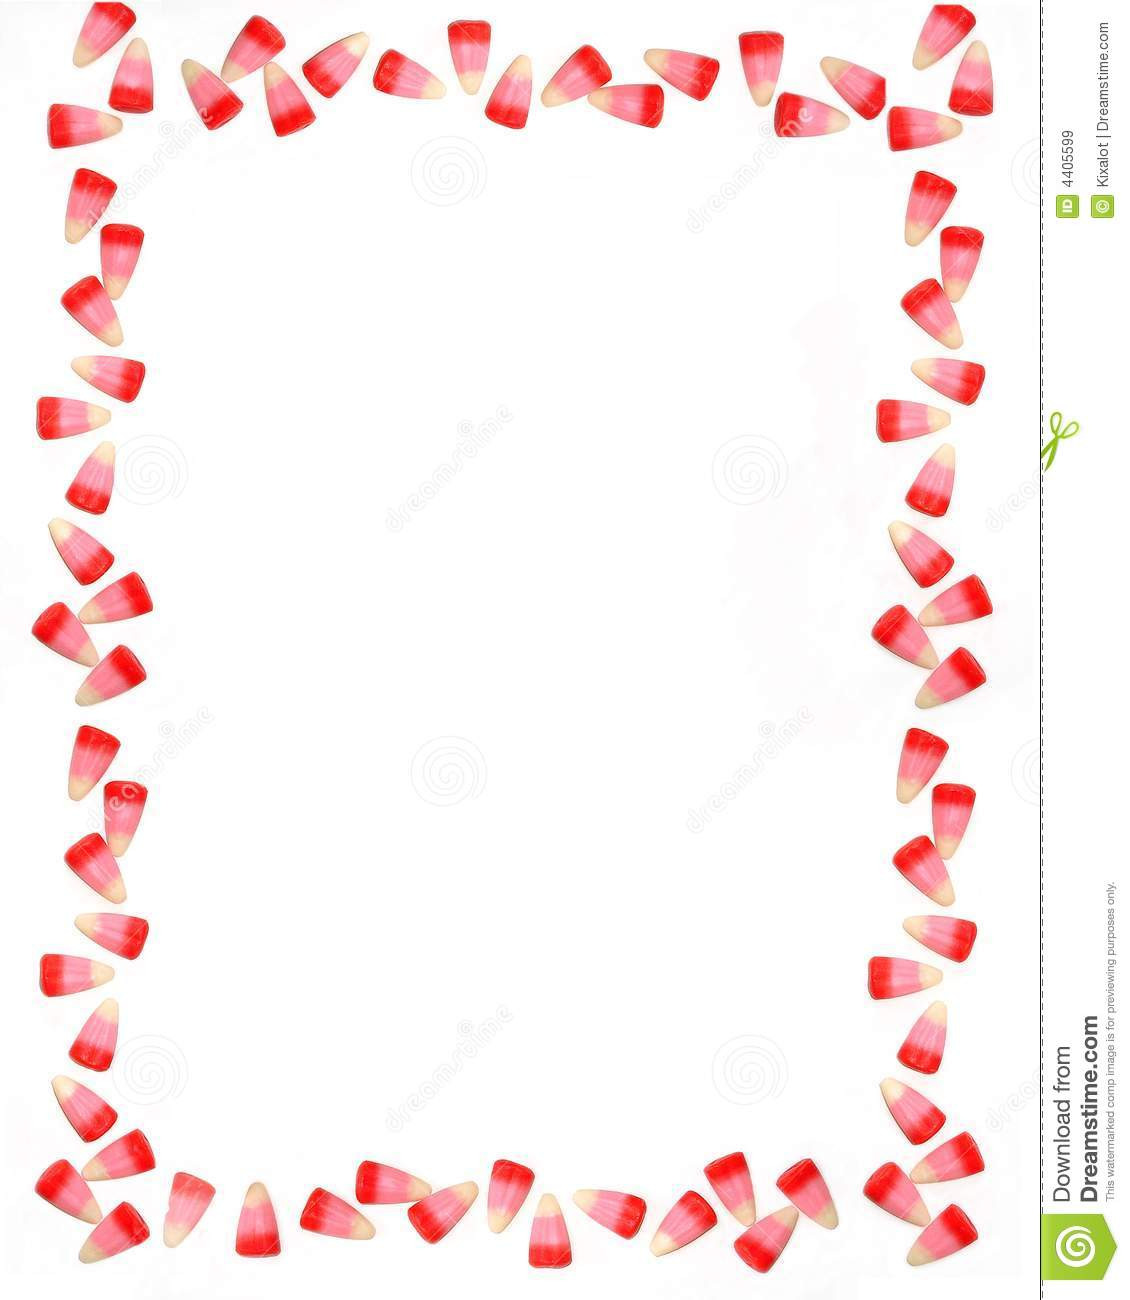 Valentines Day Candy Corn
 Valentine Candy Corn Border Frame Royalty Free Stock